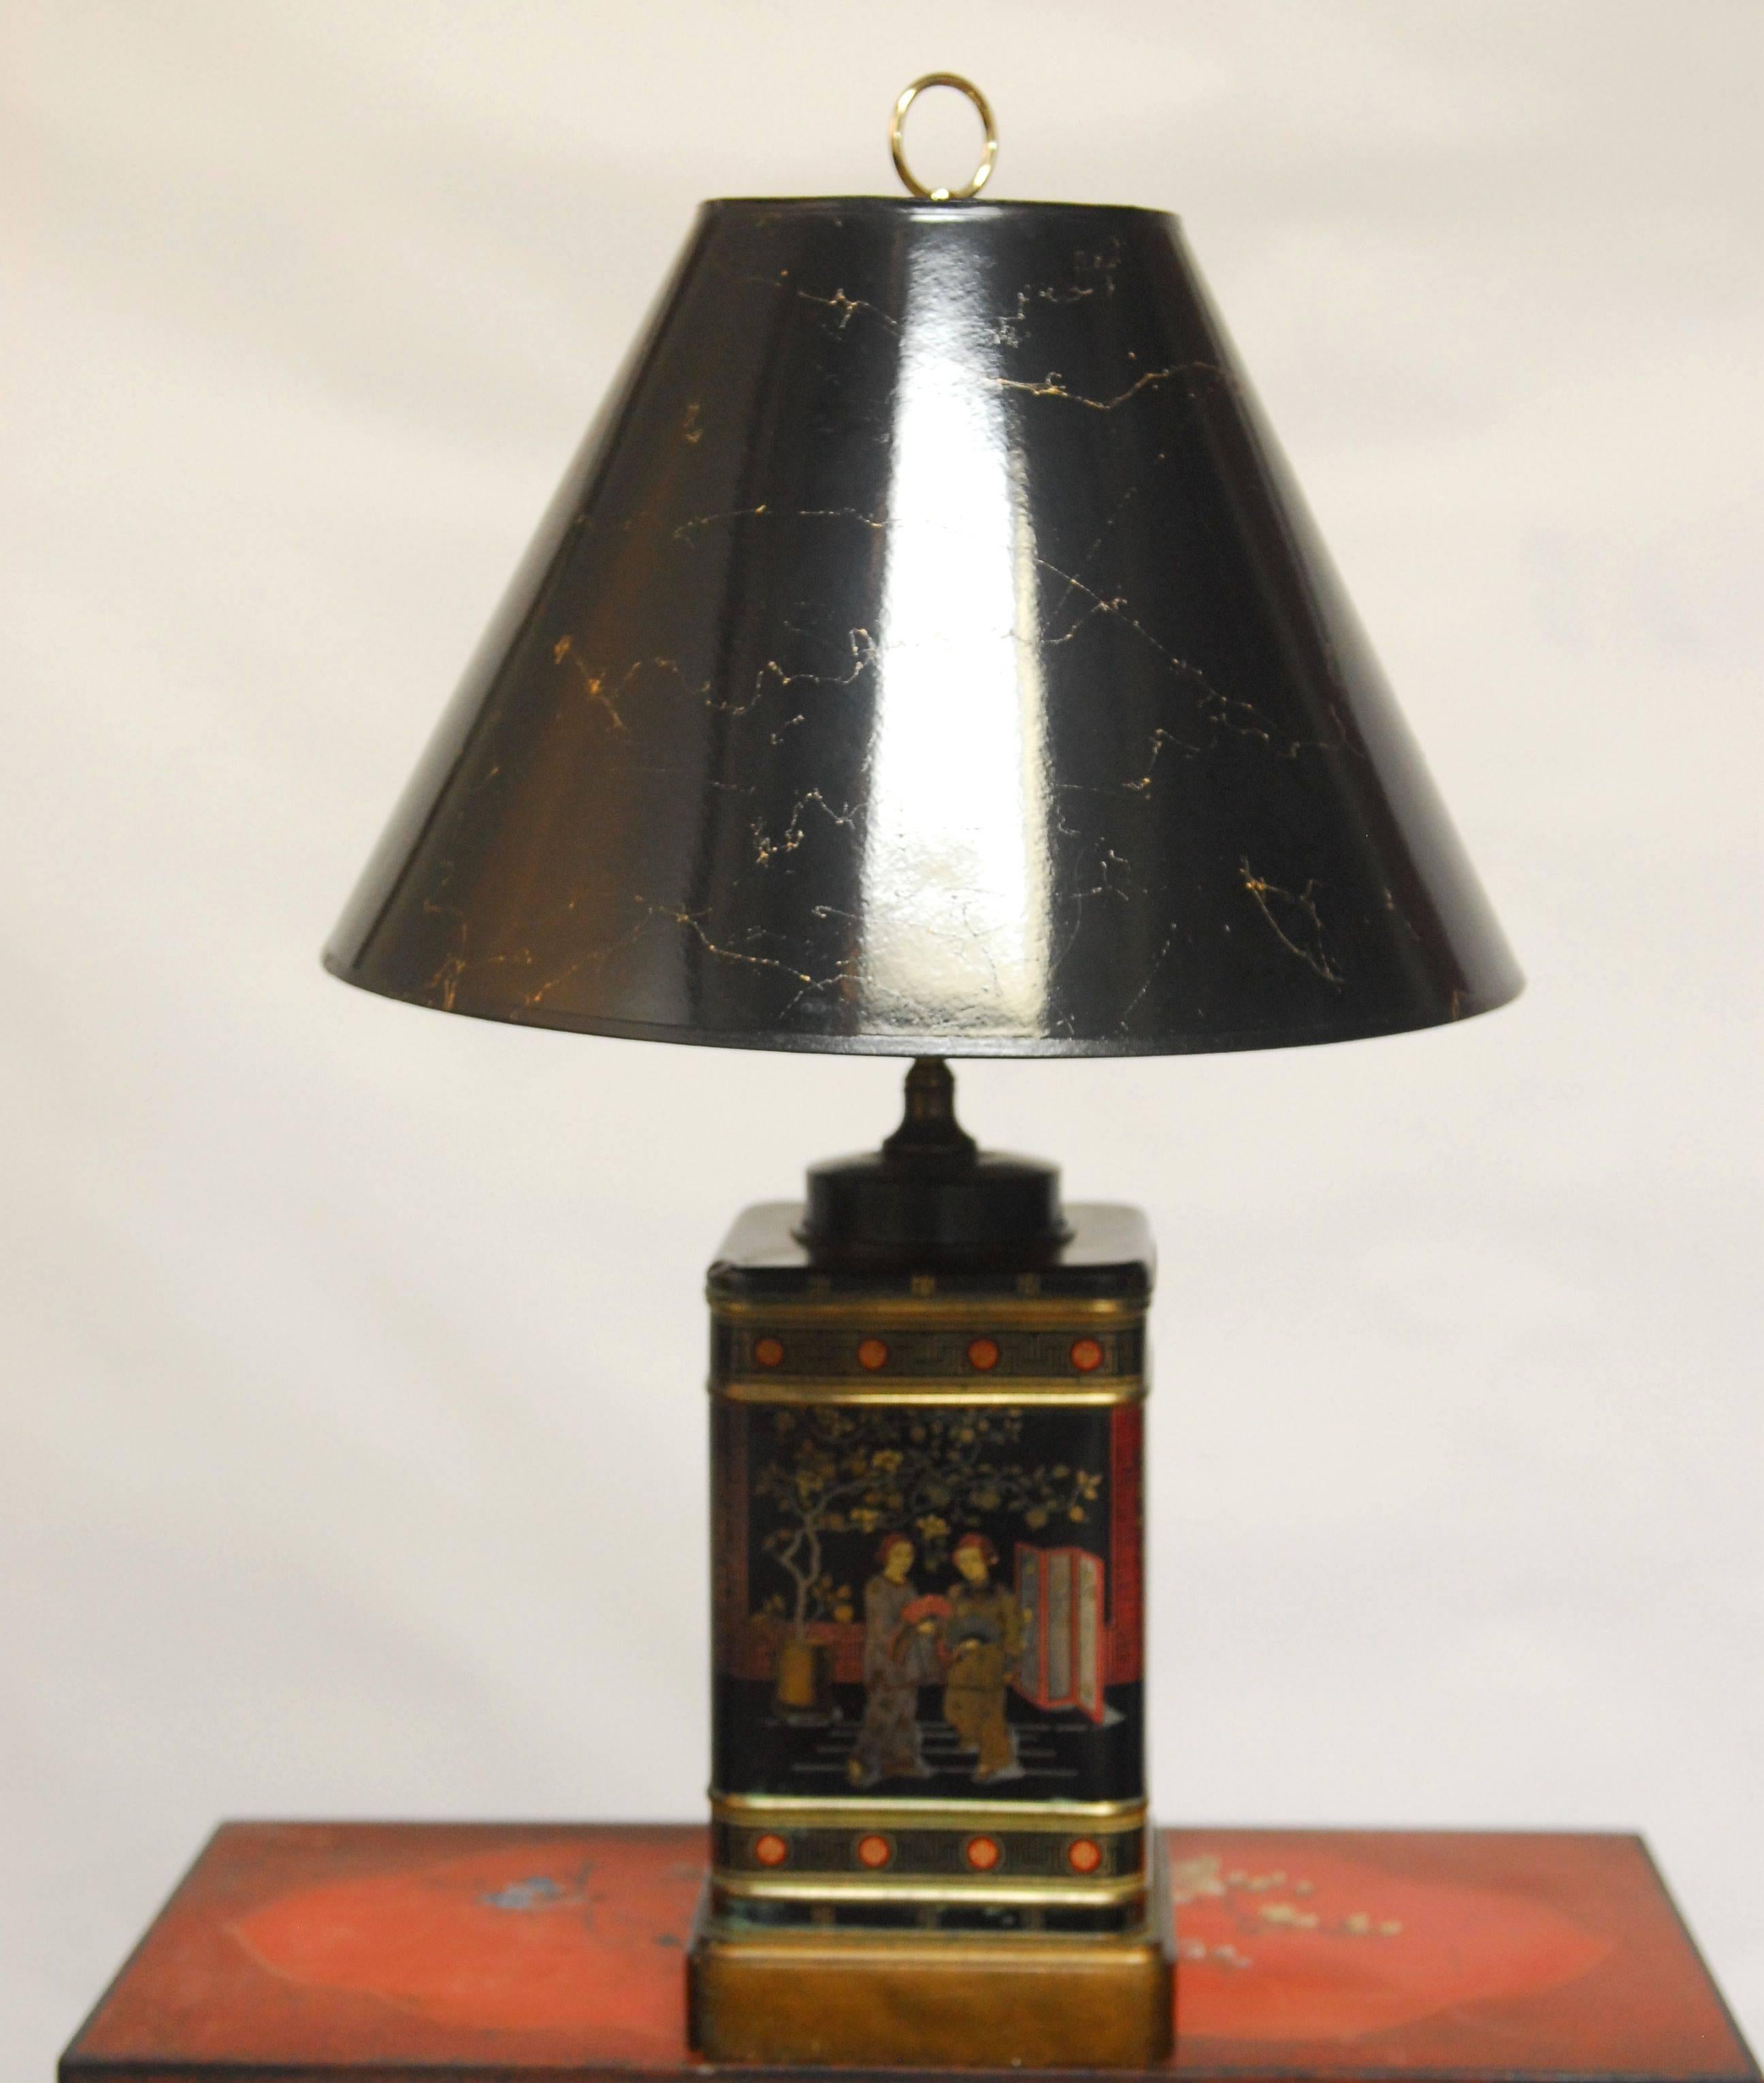 Black tea canister table lamp mounted on a giltwood base featuring different social scenes and brass hardware. Made by Frederick Cooper of Chicago, IL. from an early 1900s tea canister.